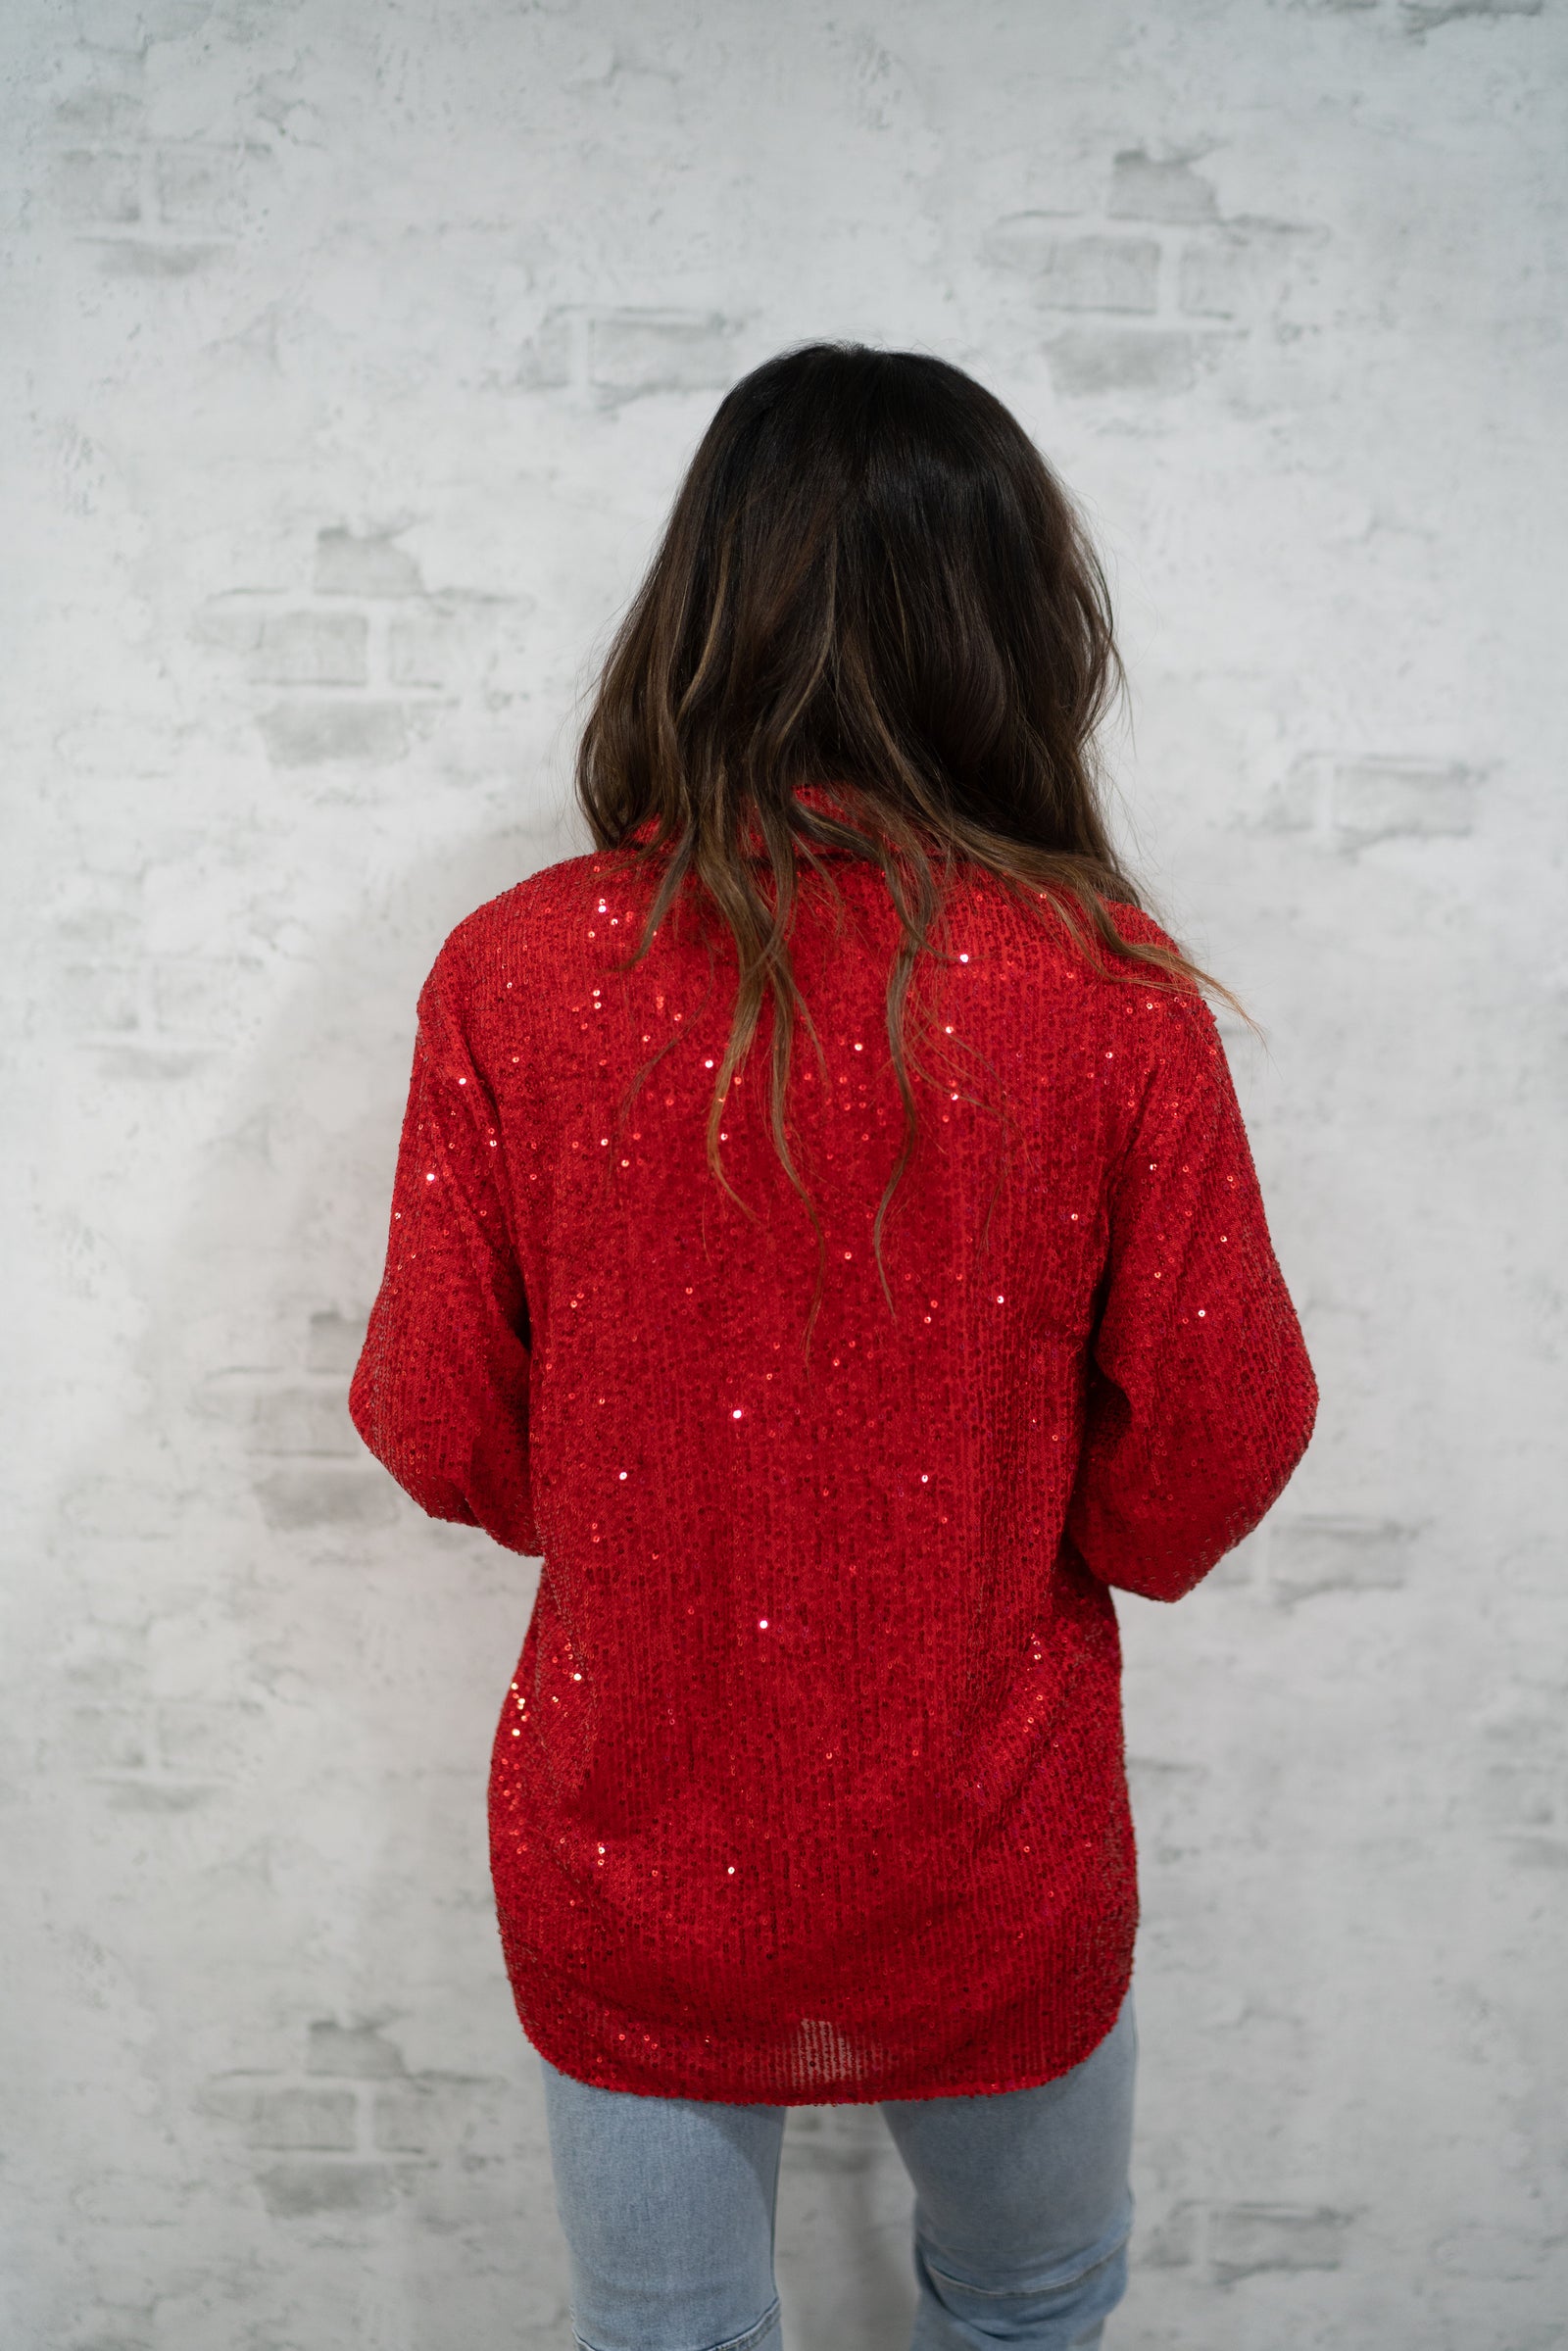 Riveting Red Top | Extended Sizing